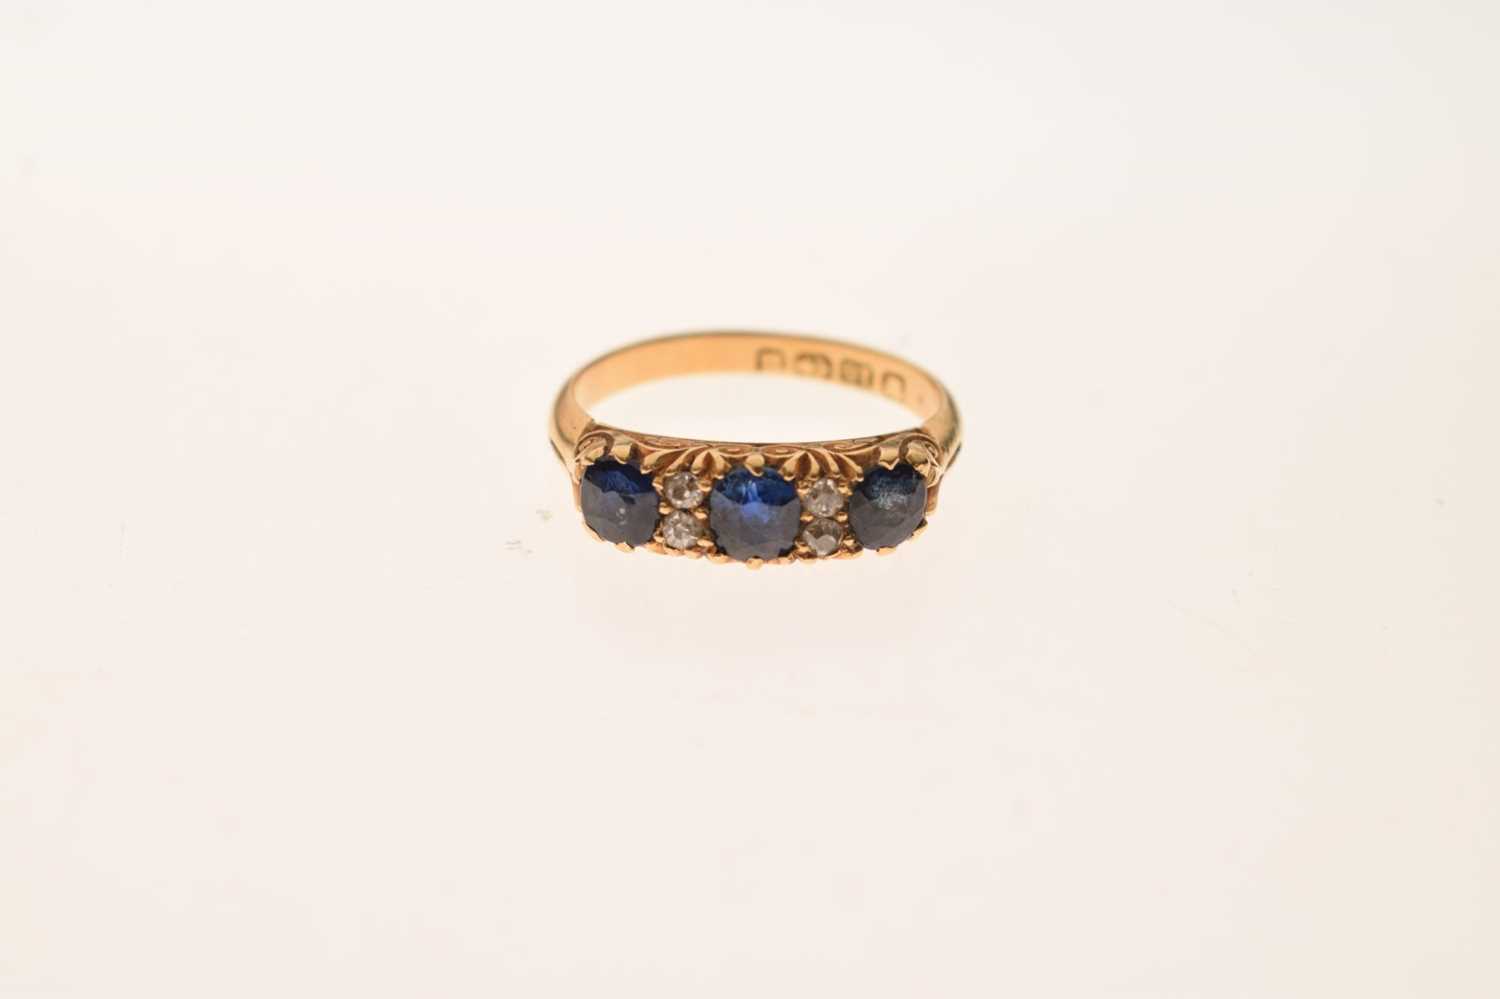 Late Victorian 18ct gold, sapphire and diamond ring - Image 6 of 6